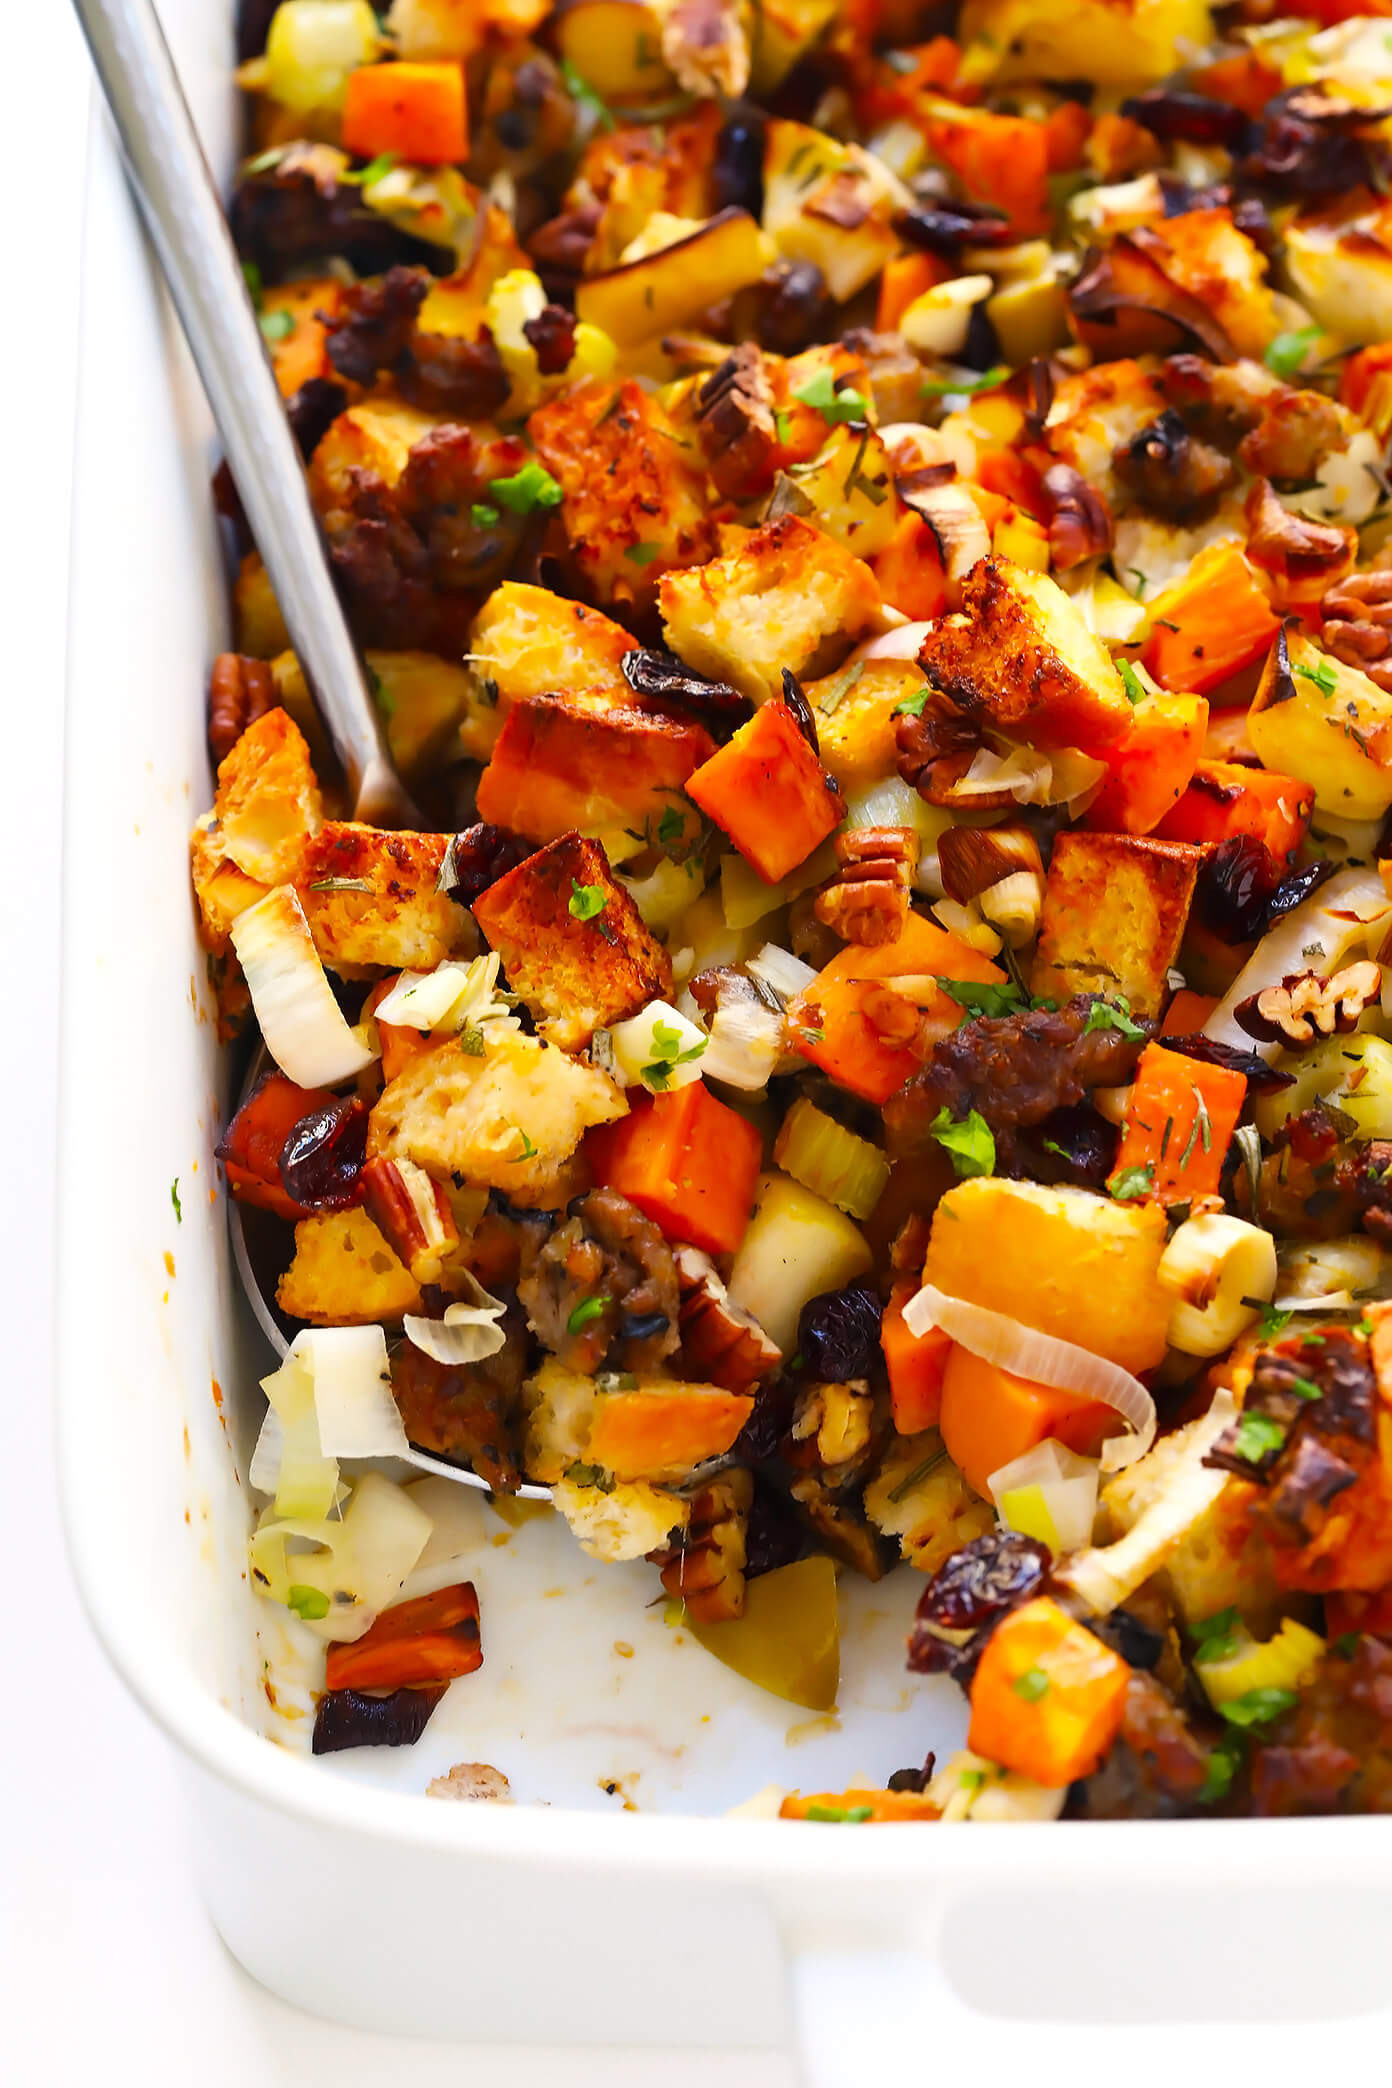 Sweet Potato Recipes For Thanksgiving
 The BEST Sausage and Sweet Potato Thanksgiving Stuffing